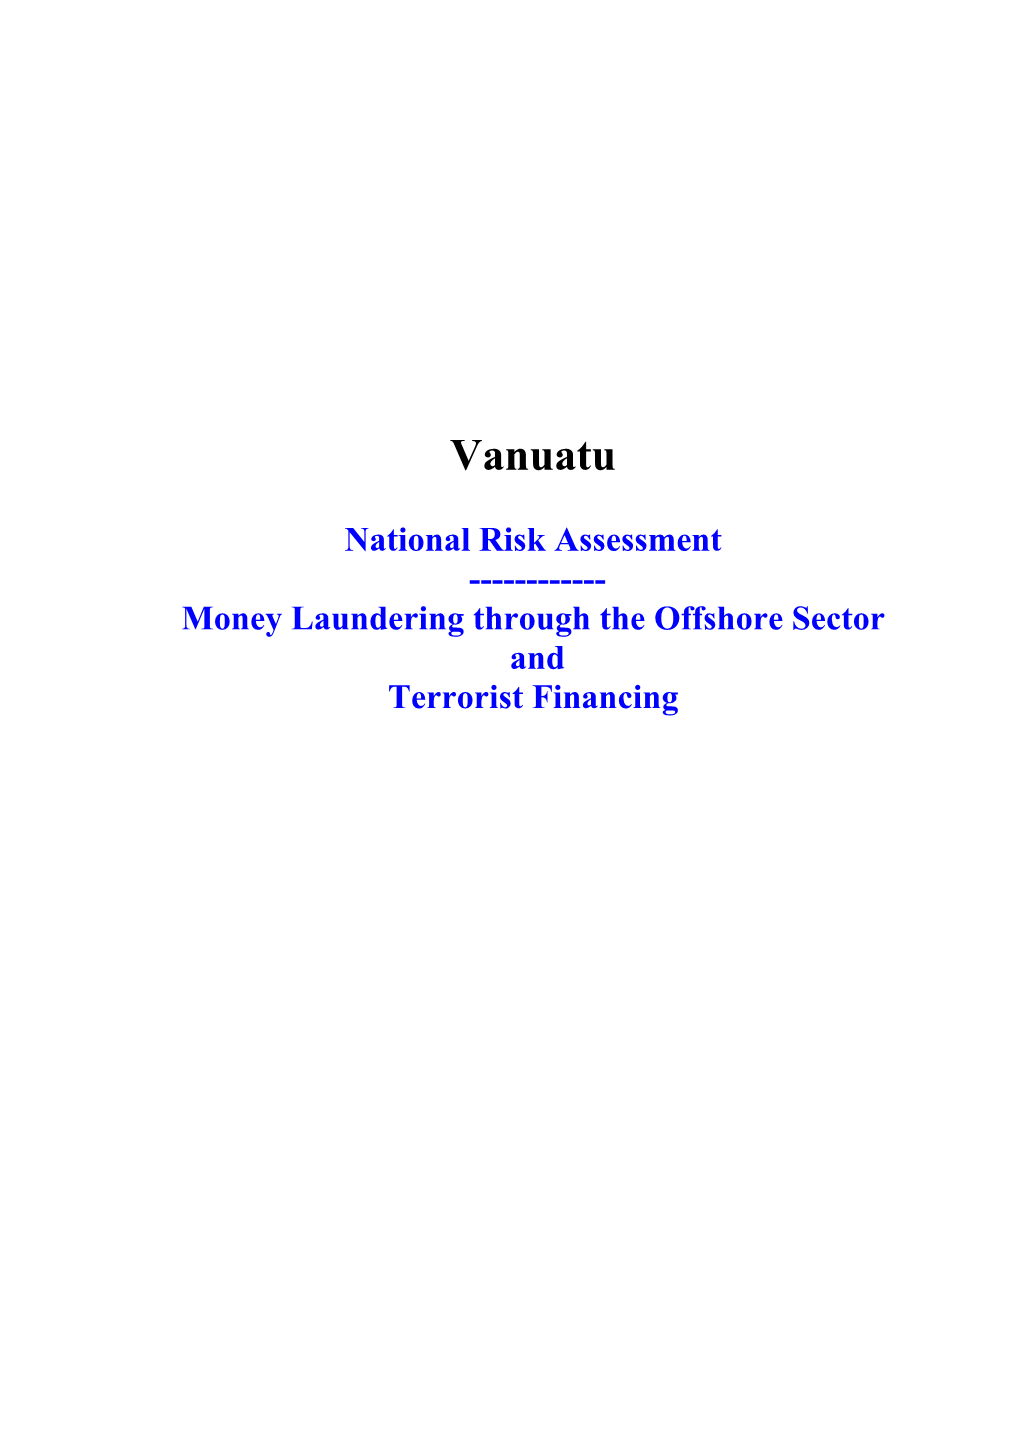 National Risk Assessment ------Money Laundering Through the Offshore Sector and Terrorist Financing